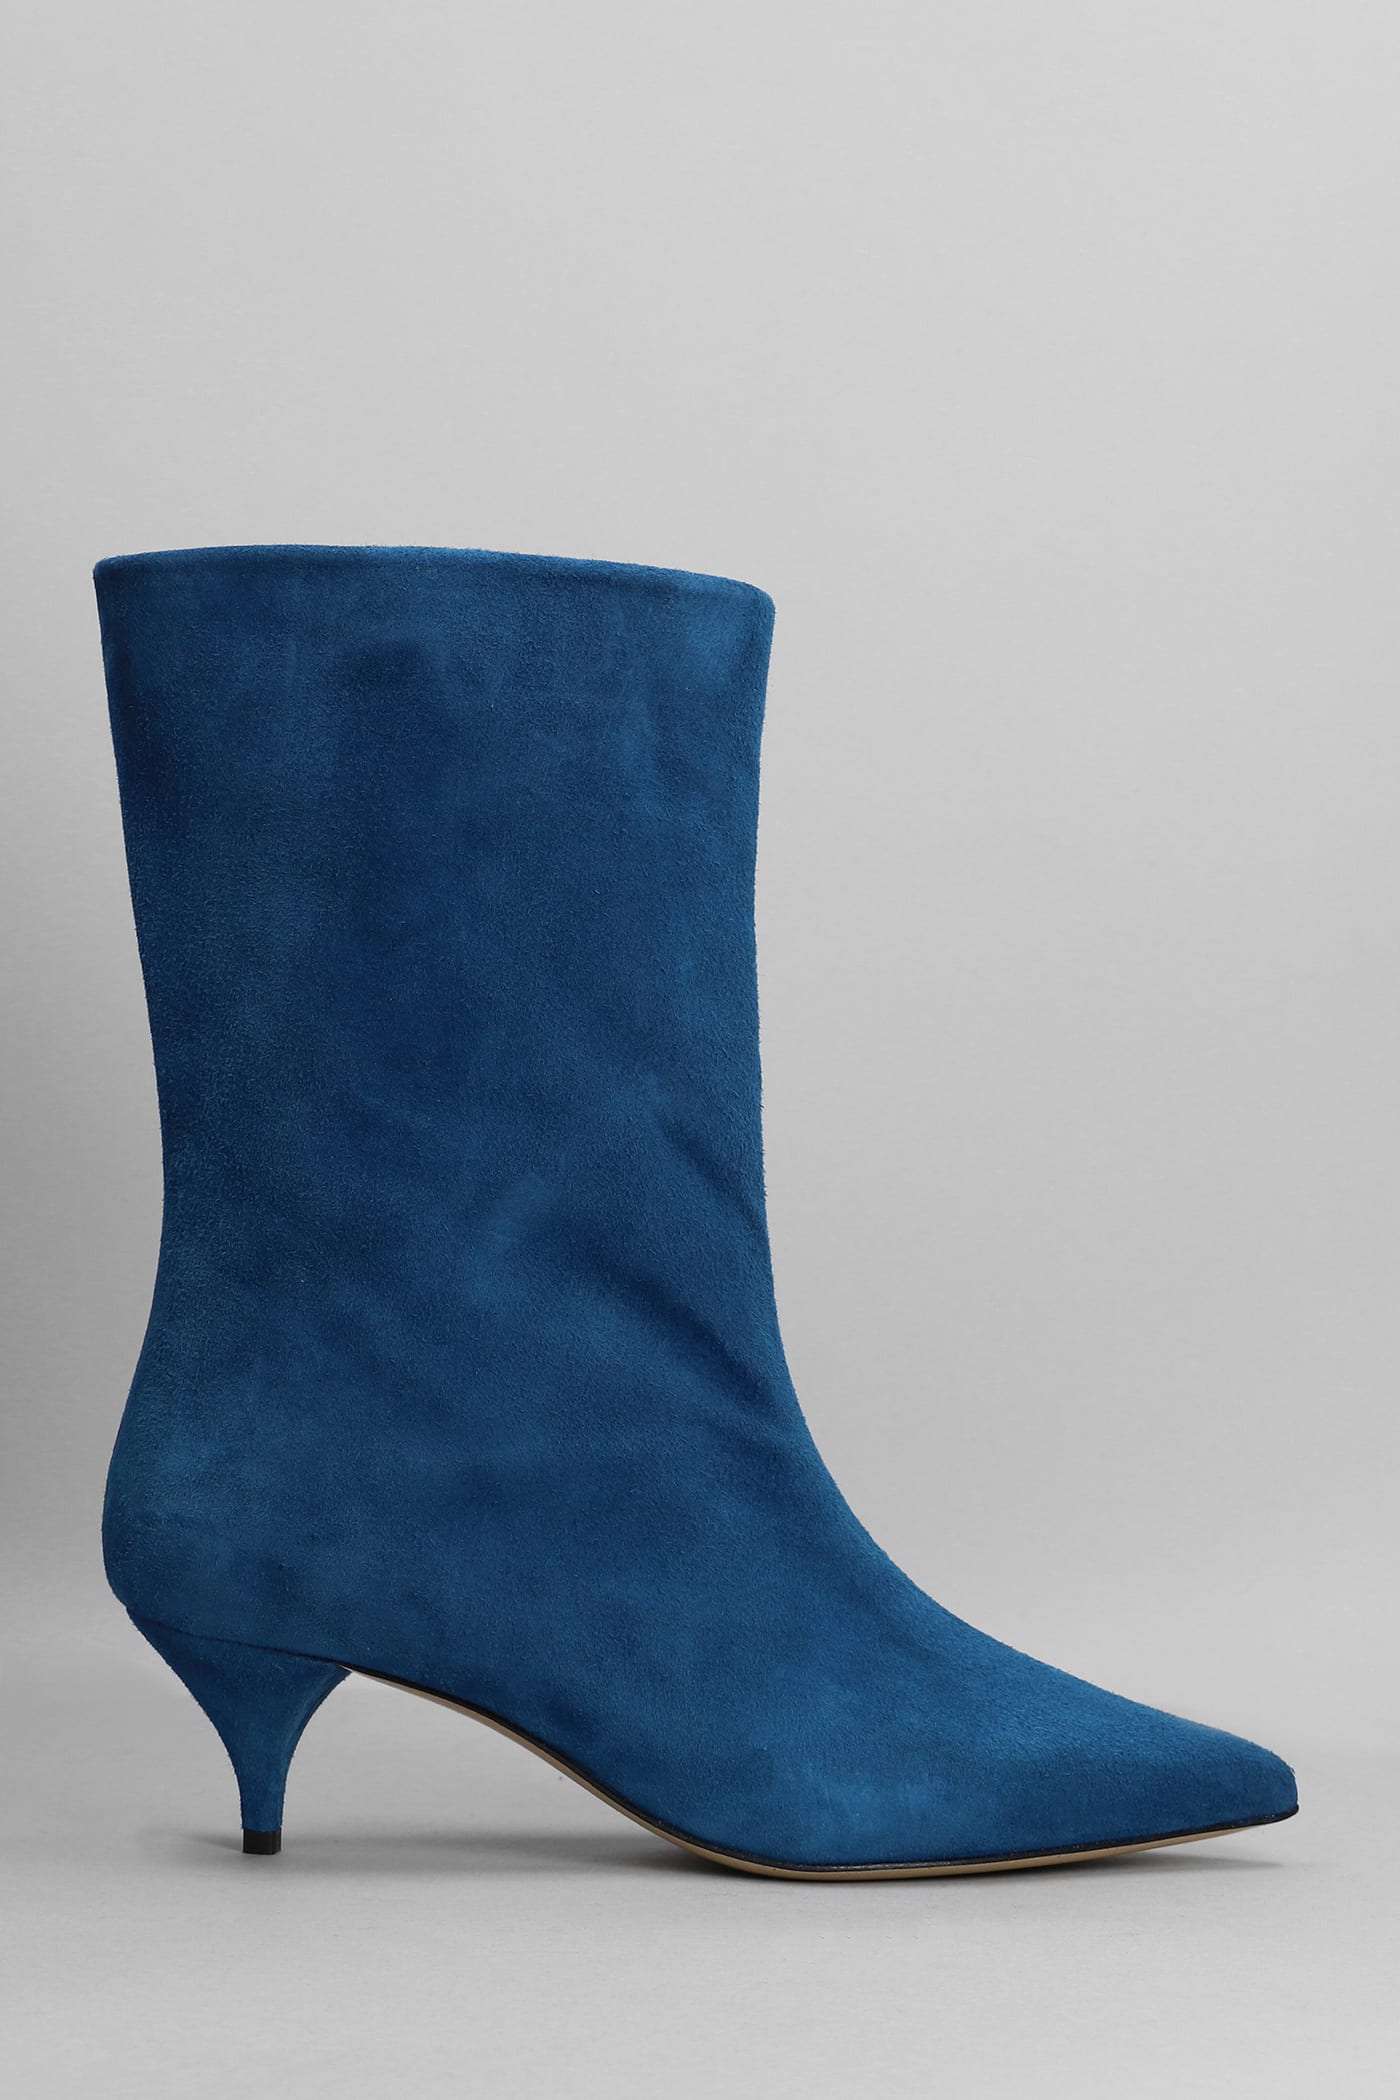 Alchimia High Heels Ankle Boots In Petroleum Suede